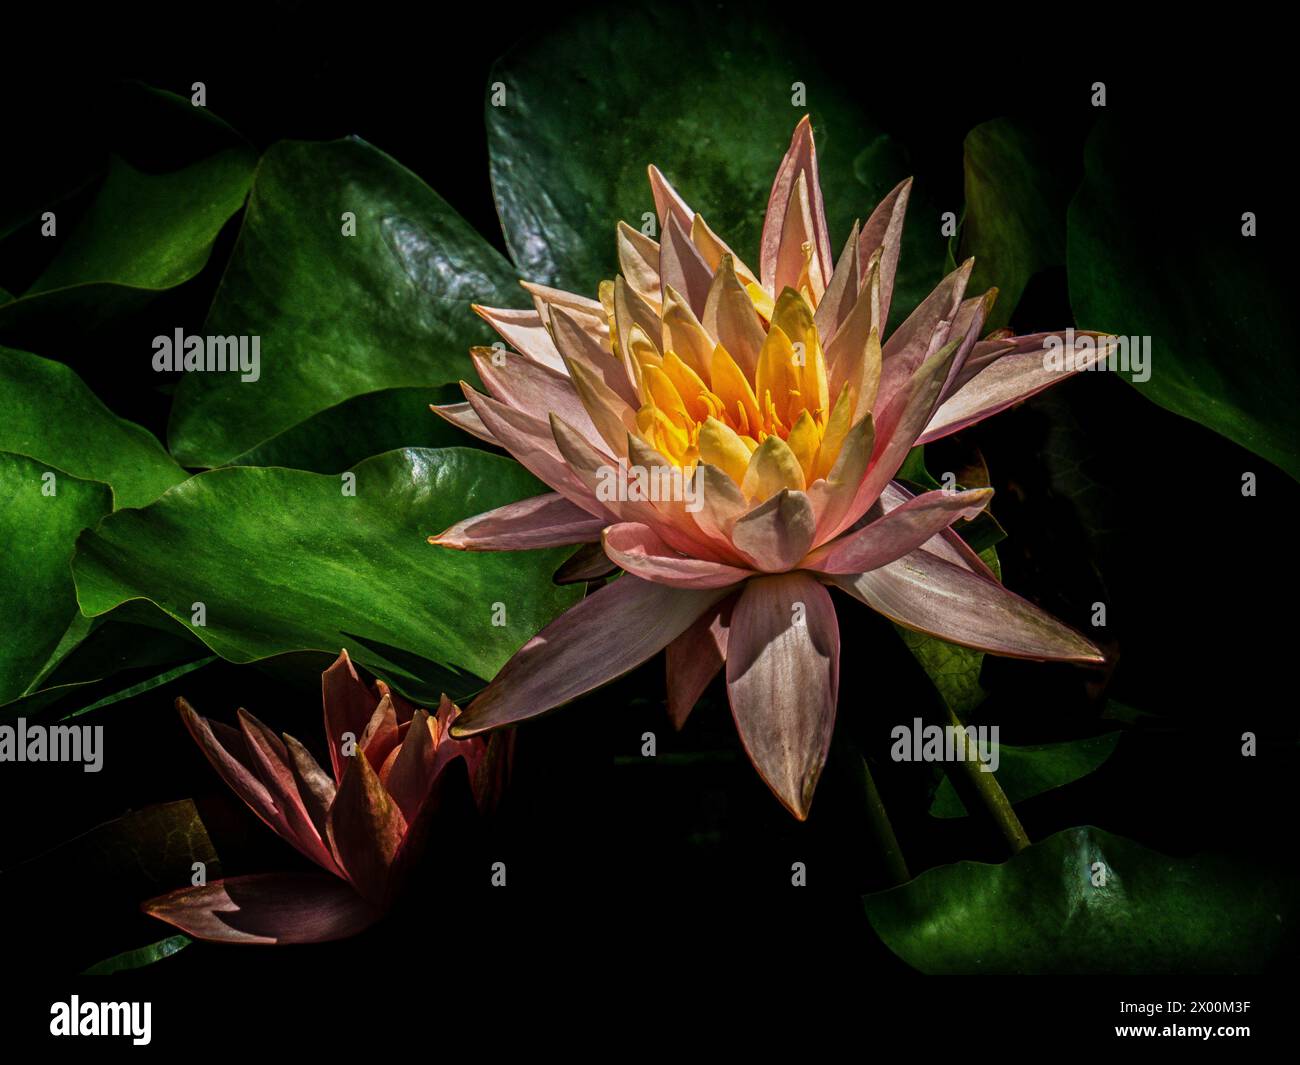 Colorfu  detailed and moody picture of a water lily growing in a pond Sierra Vista Arizona Stock Photo